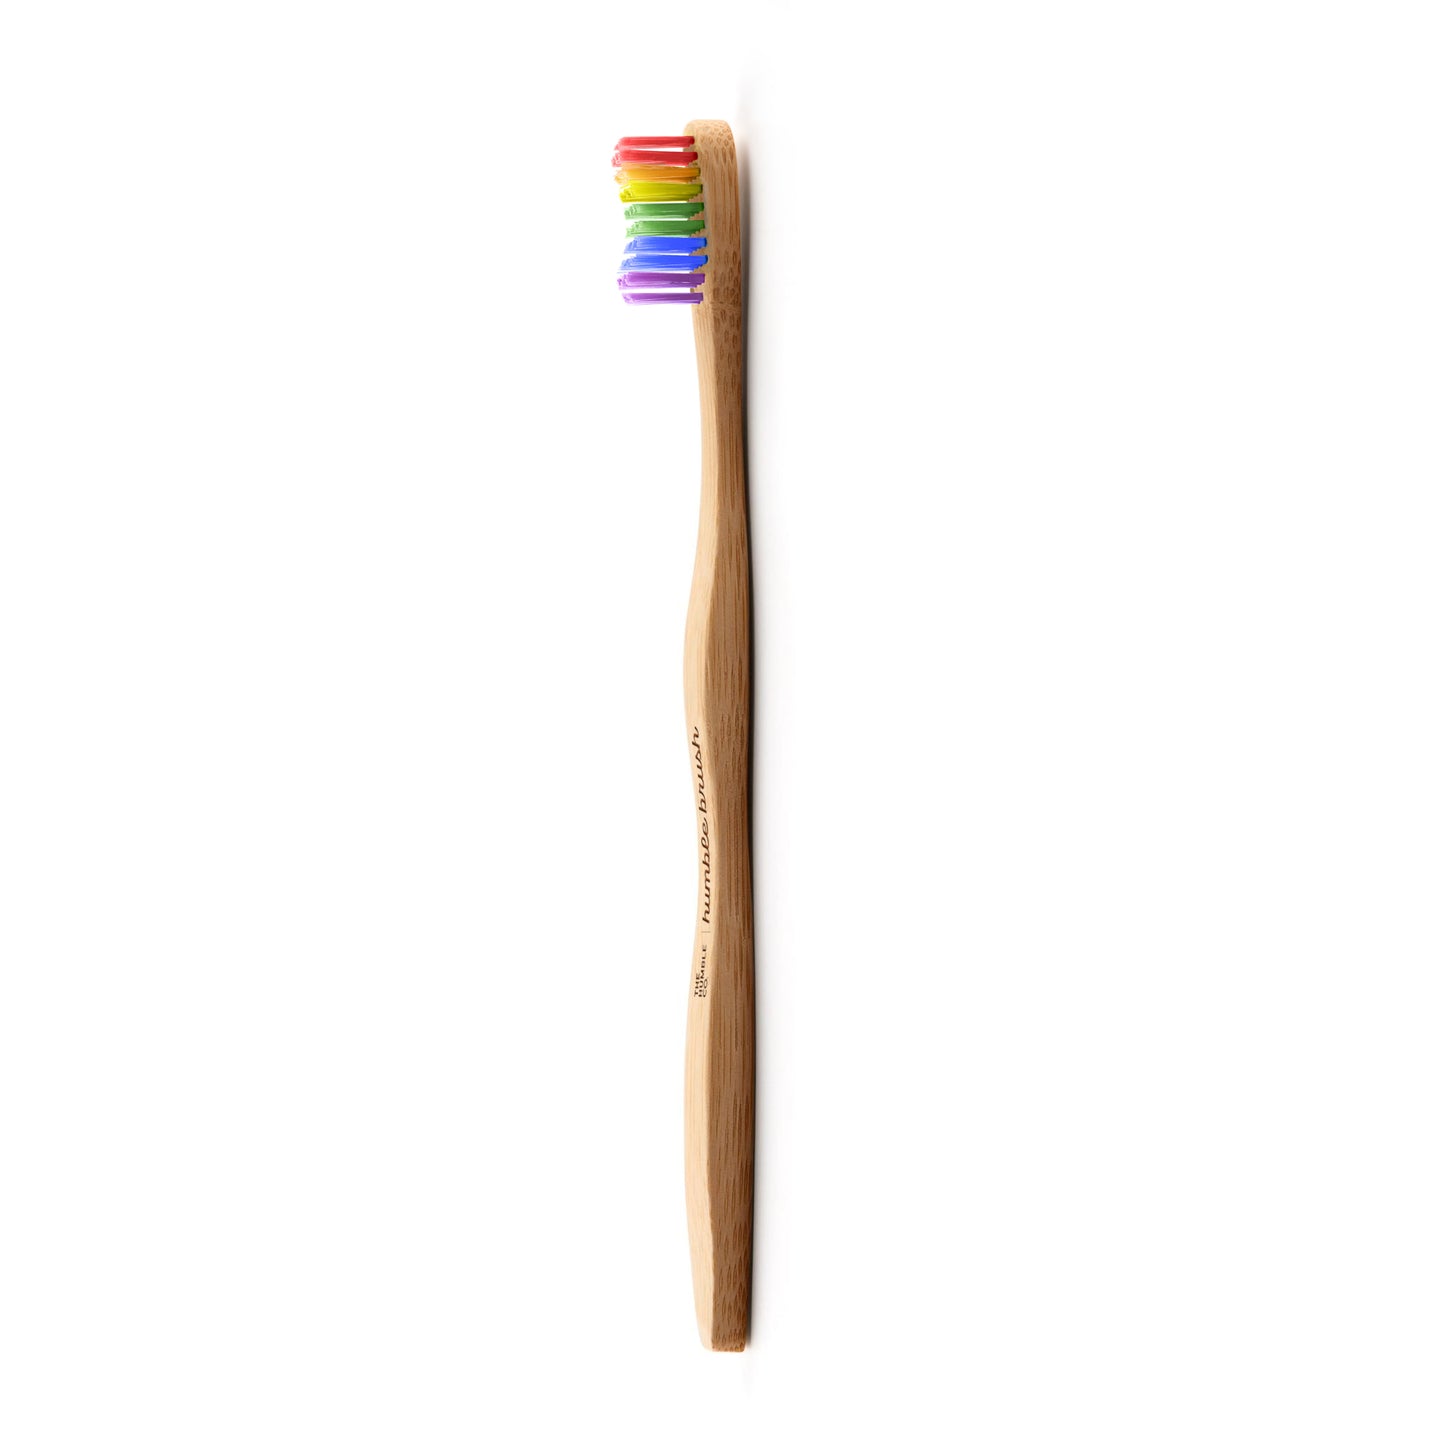 Bamboo Toothbrush | Soft Proud Edition